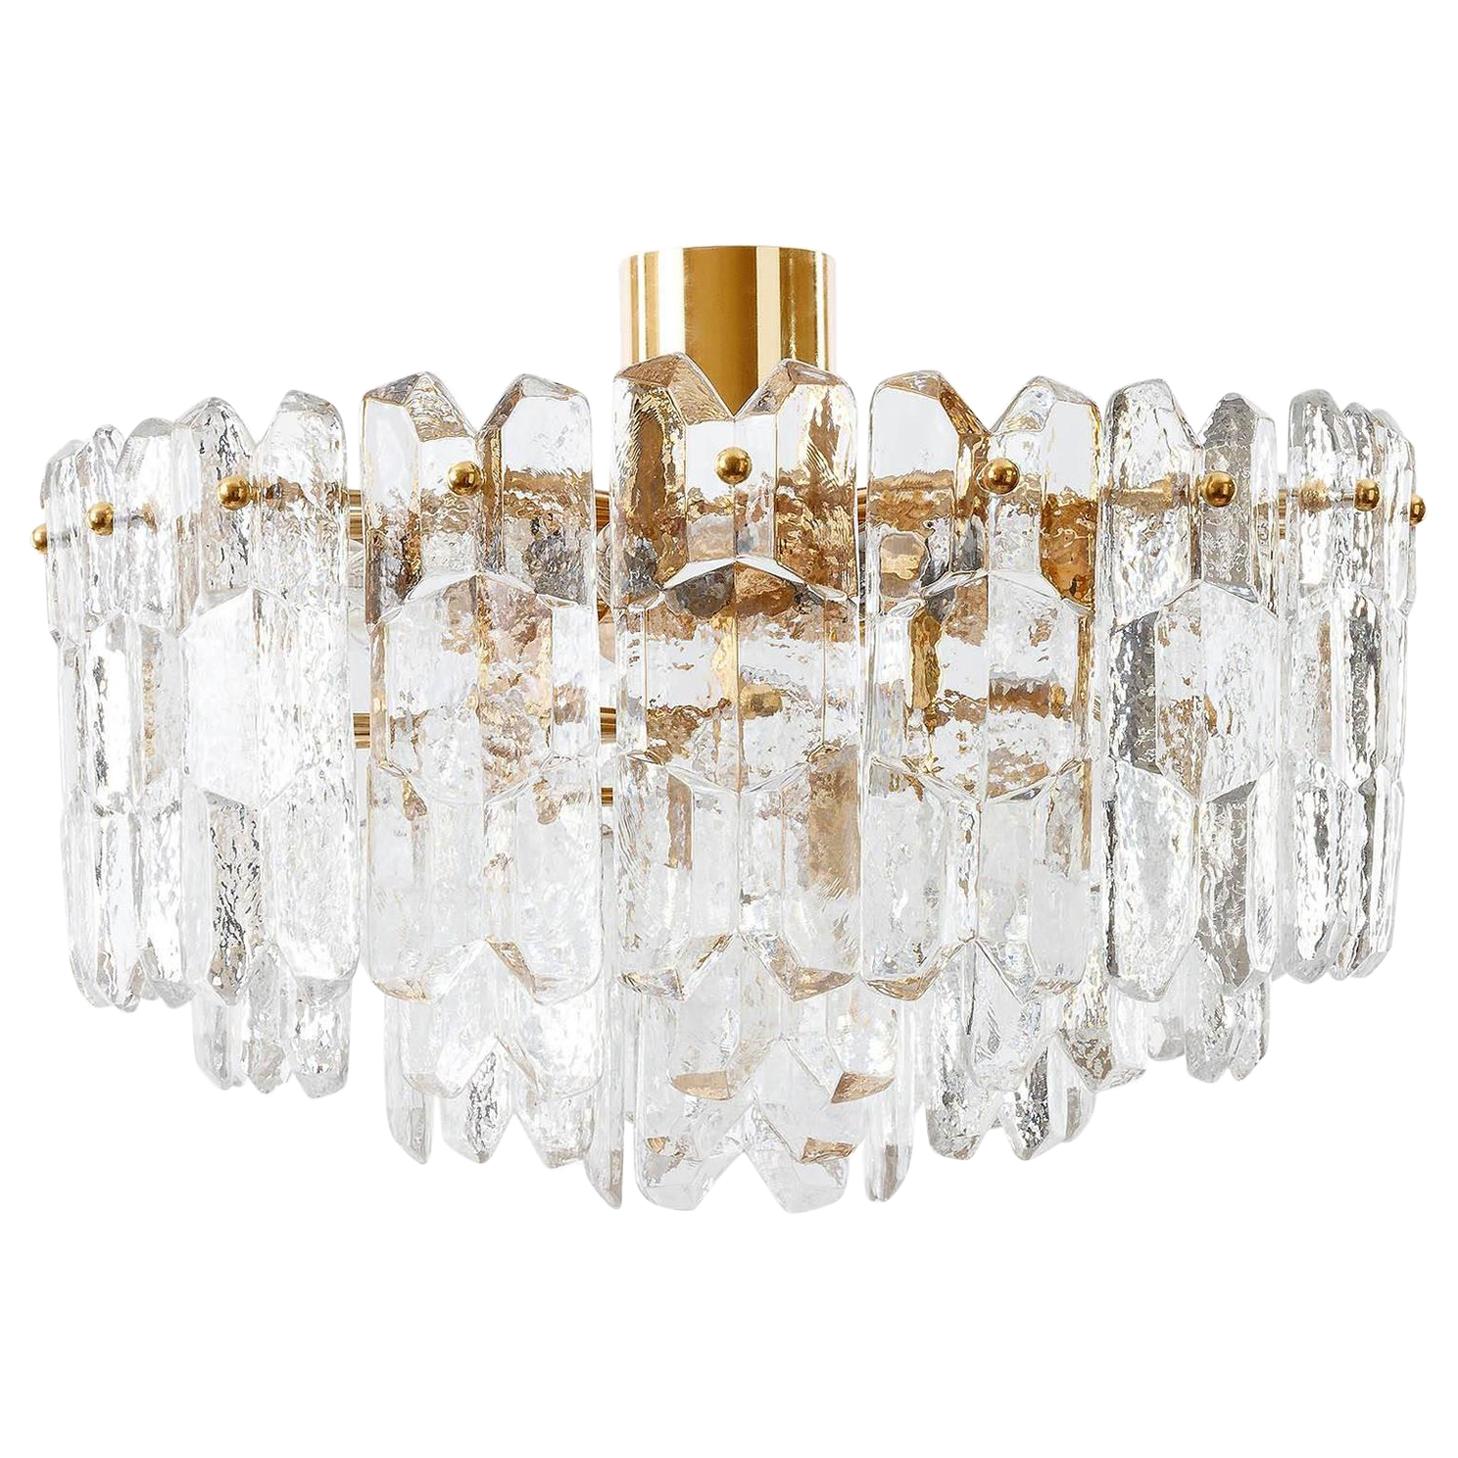 A set of very exquisite 24-carat gold-plated brass and clear brilliant glass Hollywood Regency flushmount light fixtures model 'Palazzo' by J.T. Kalmar, Vienna, Austria, manufactured in midcentury, circa 1970 (late 1960s or early 1970s).
The set